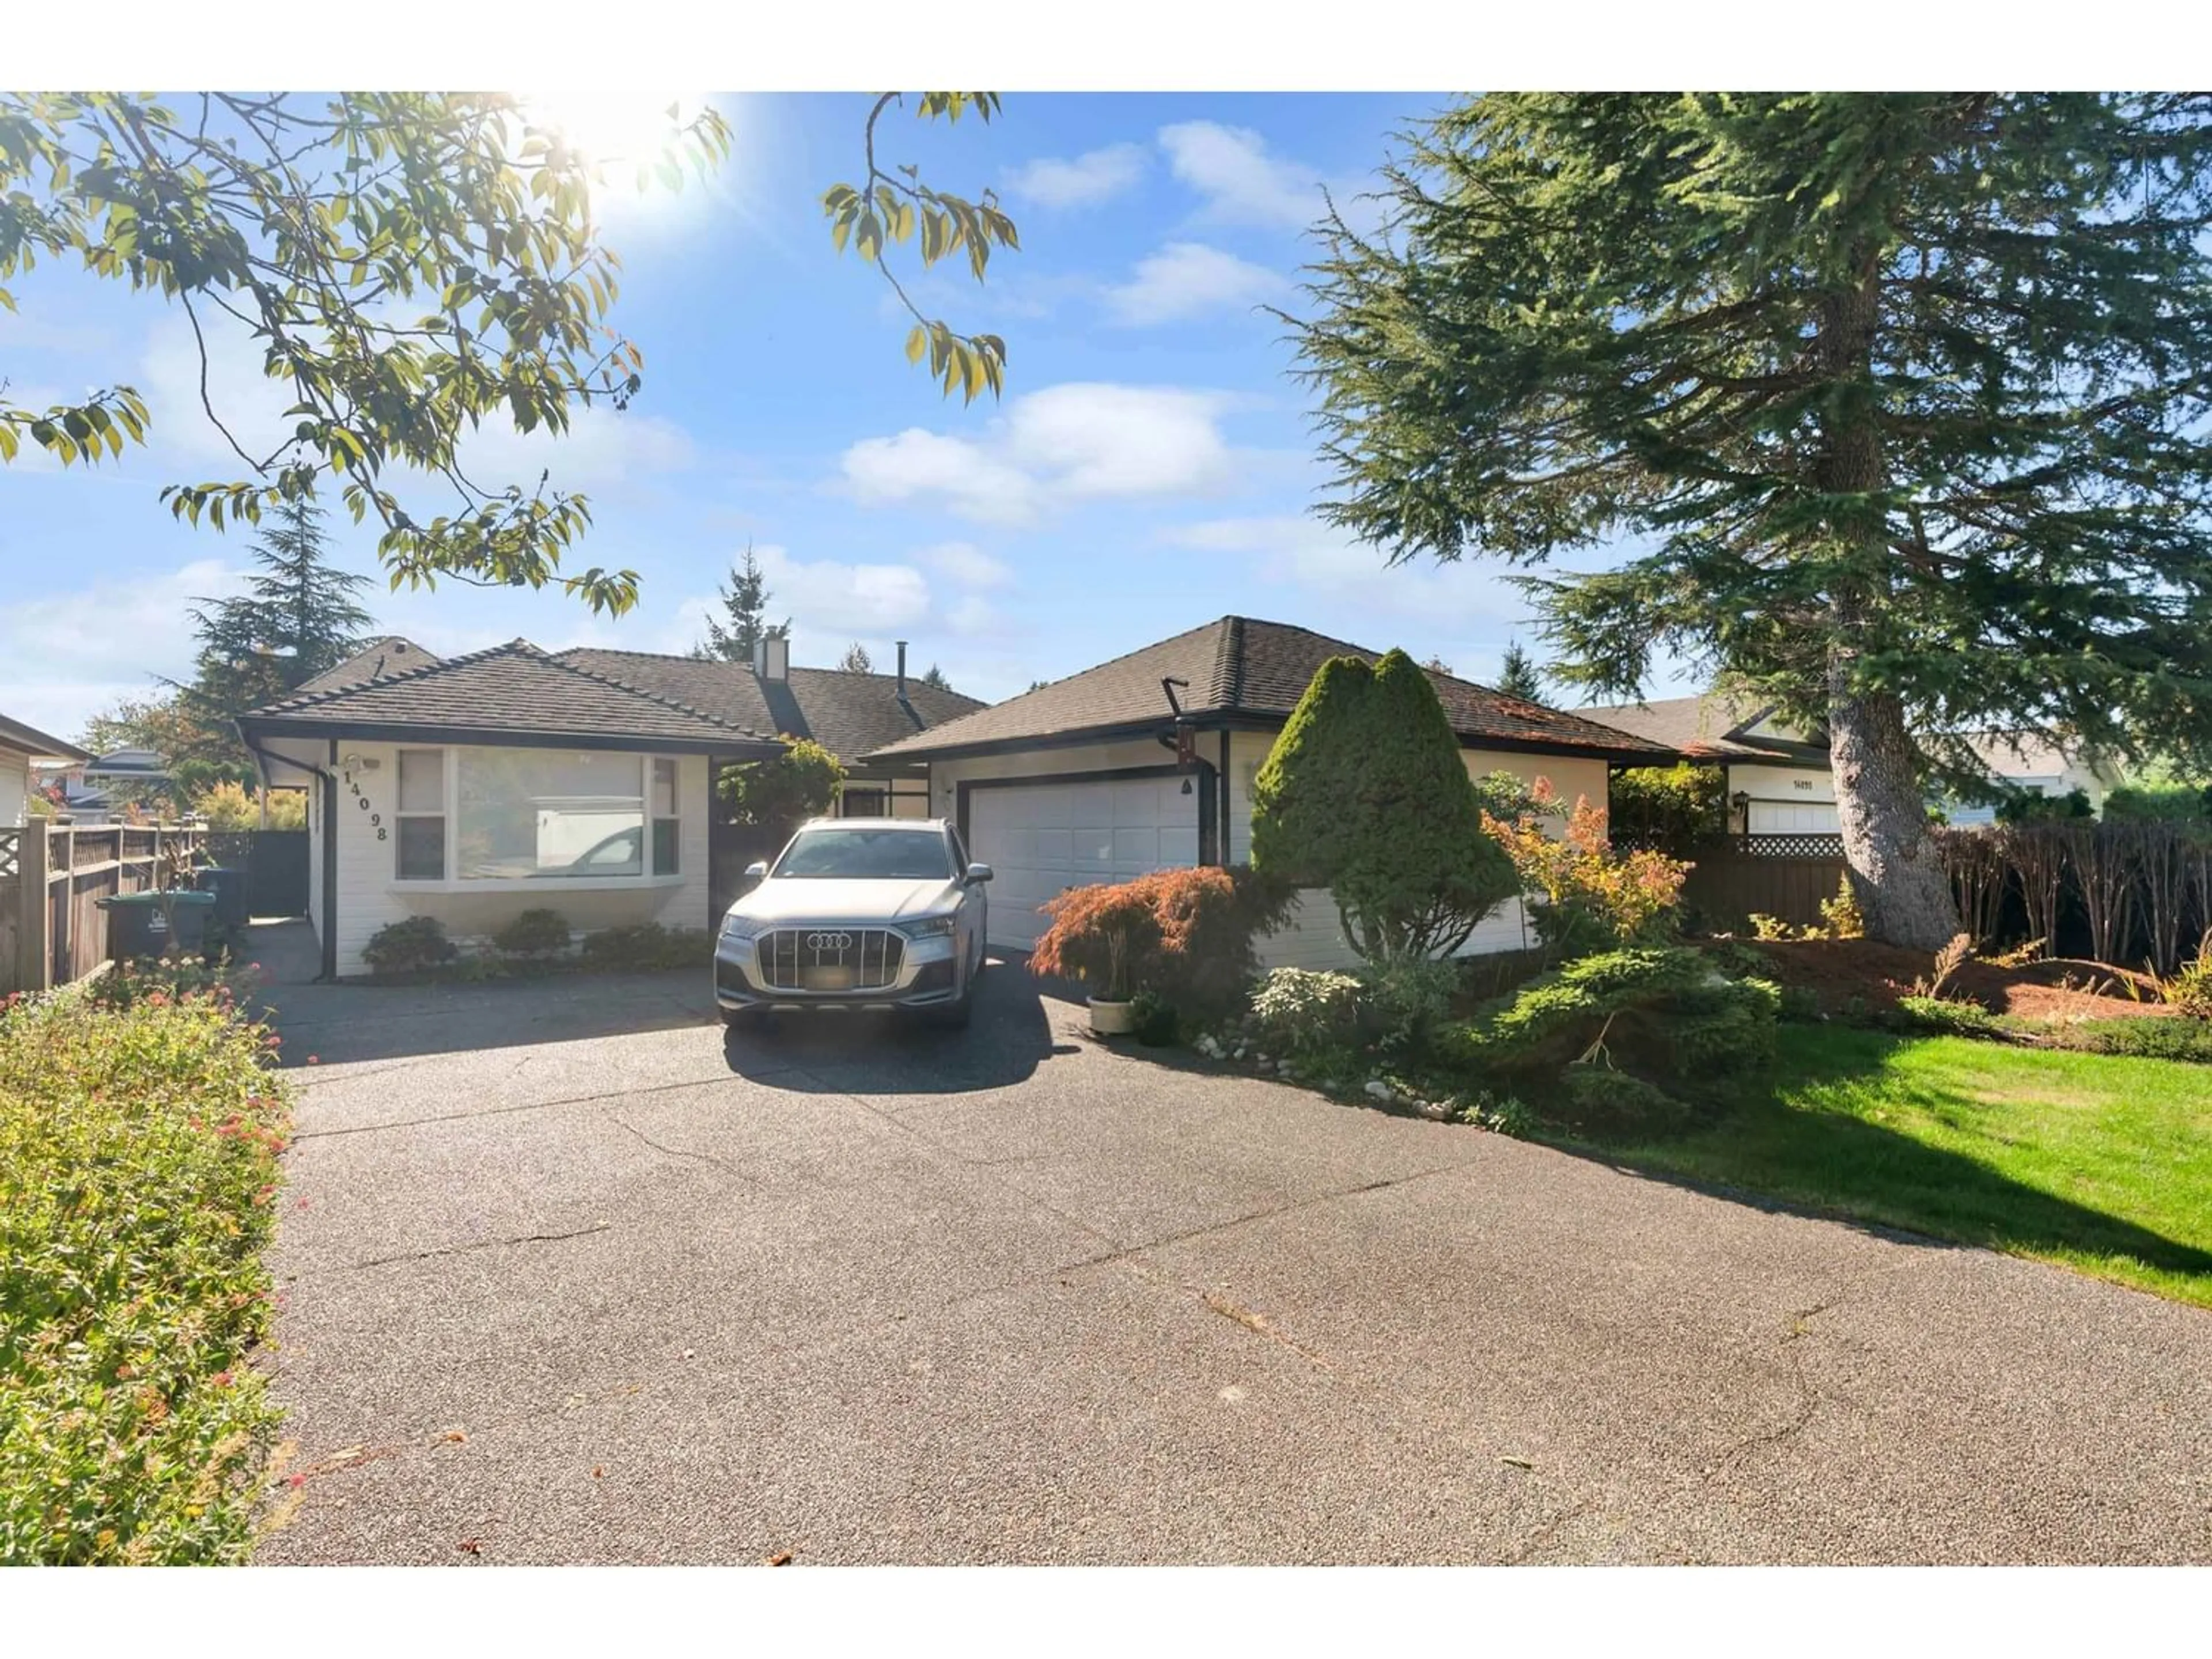 Frontside or backside of a home for 14098 20 AVENUE, Surrey British Columbia V4A8P8